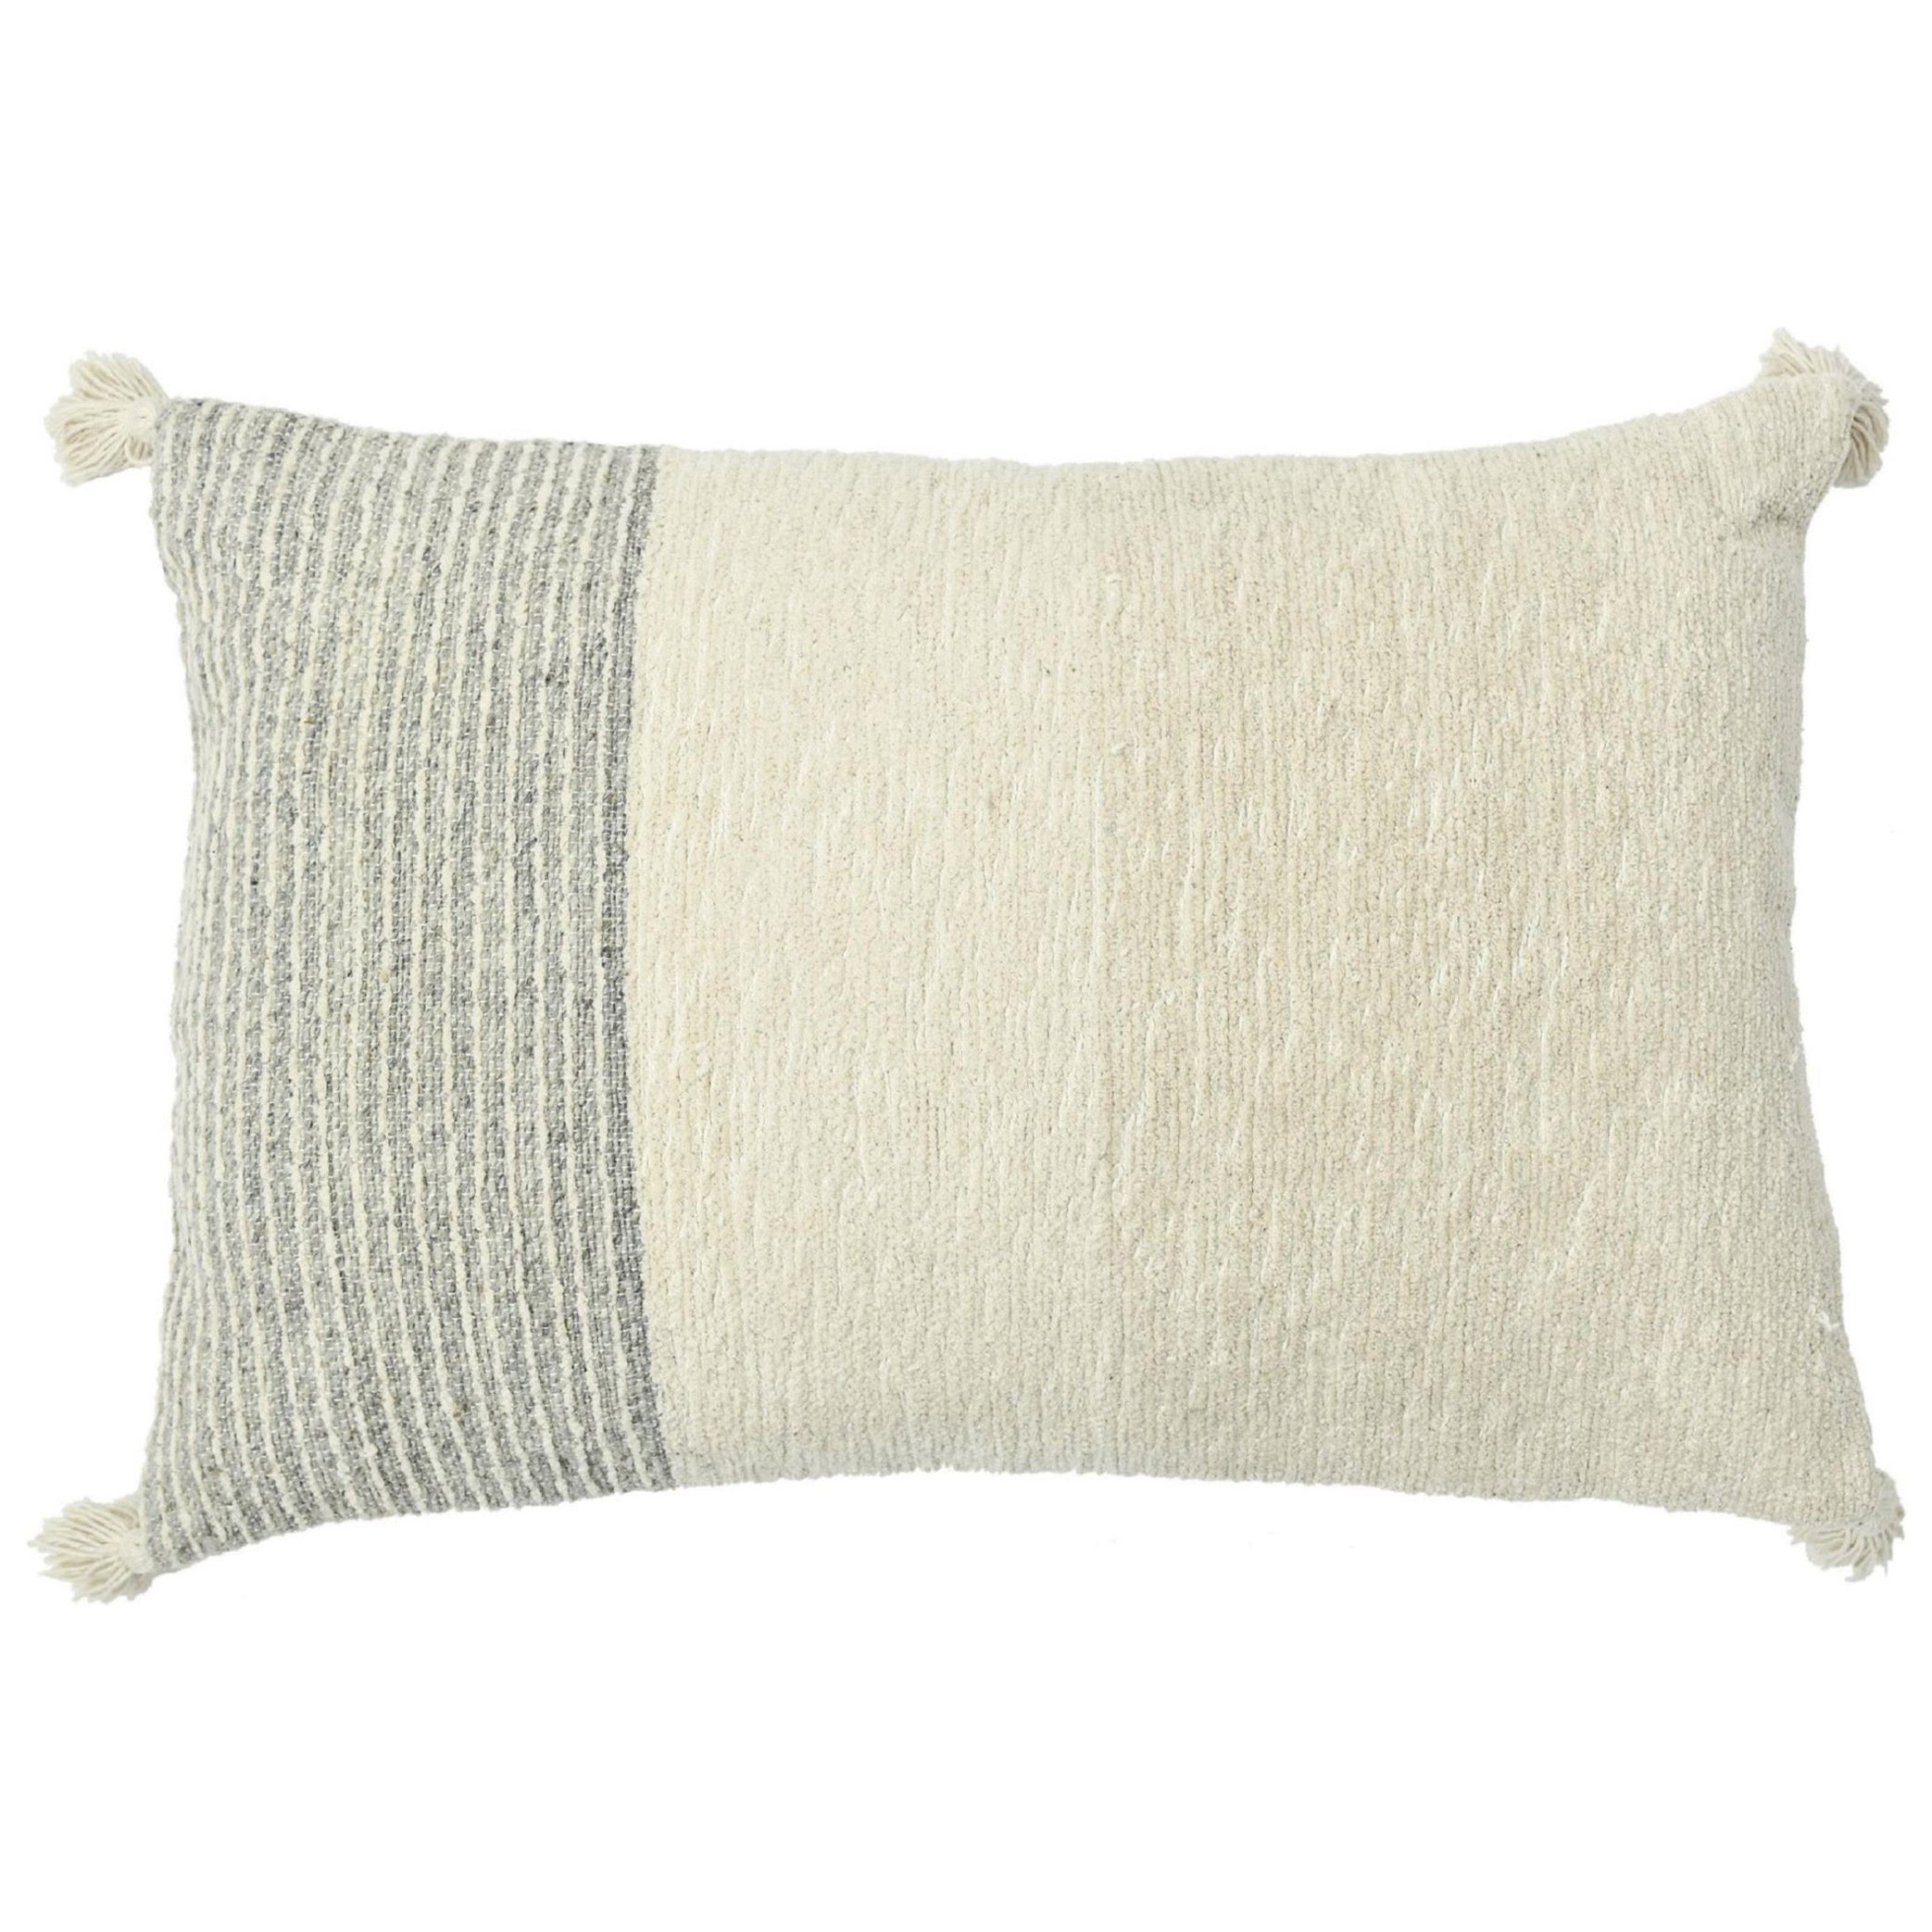 Modern Chic Wool and Cotton Pillow With Geometric Pattern In Ivory